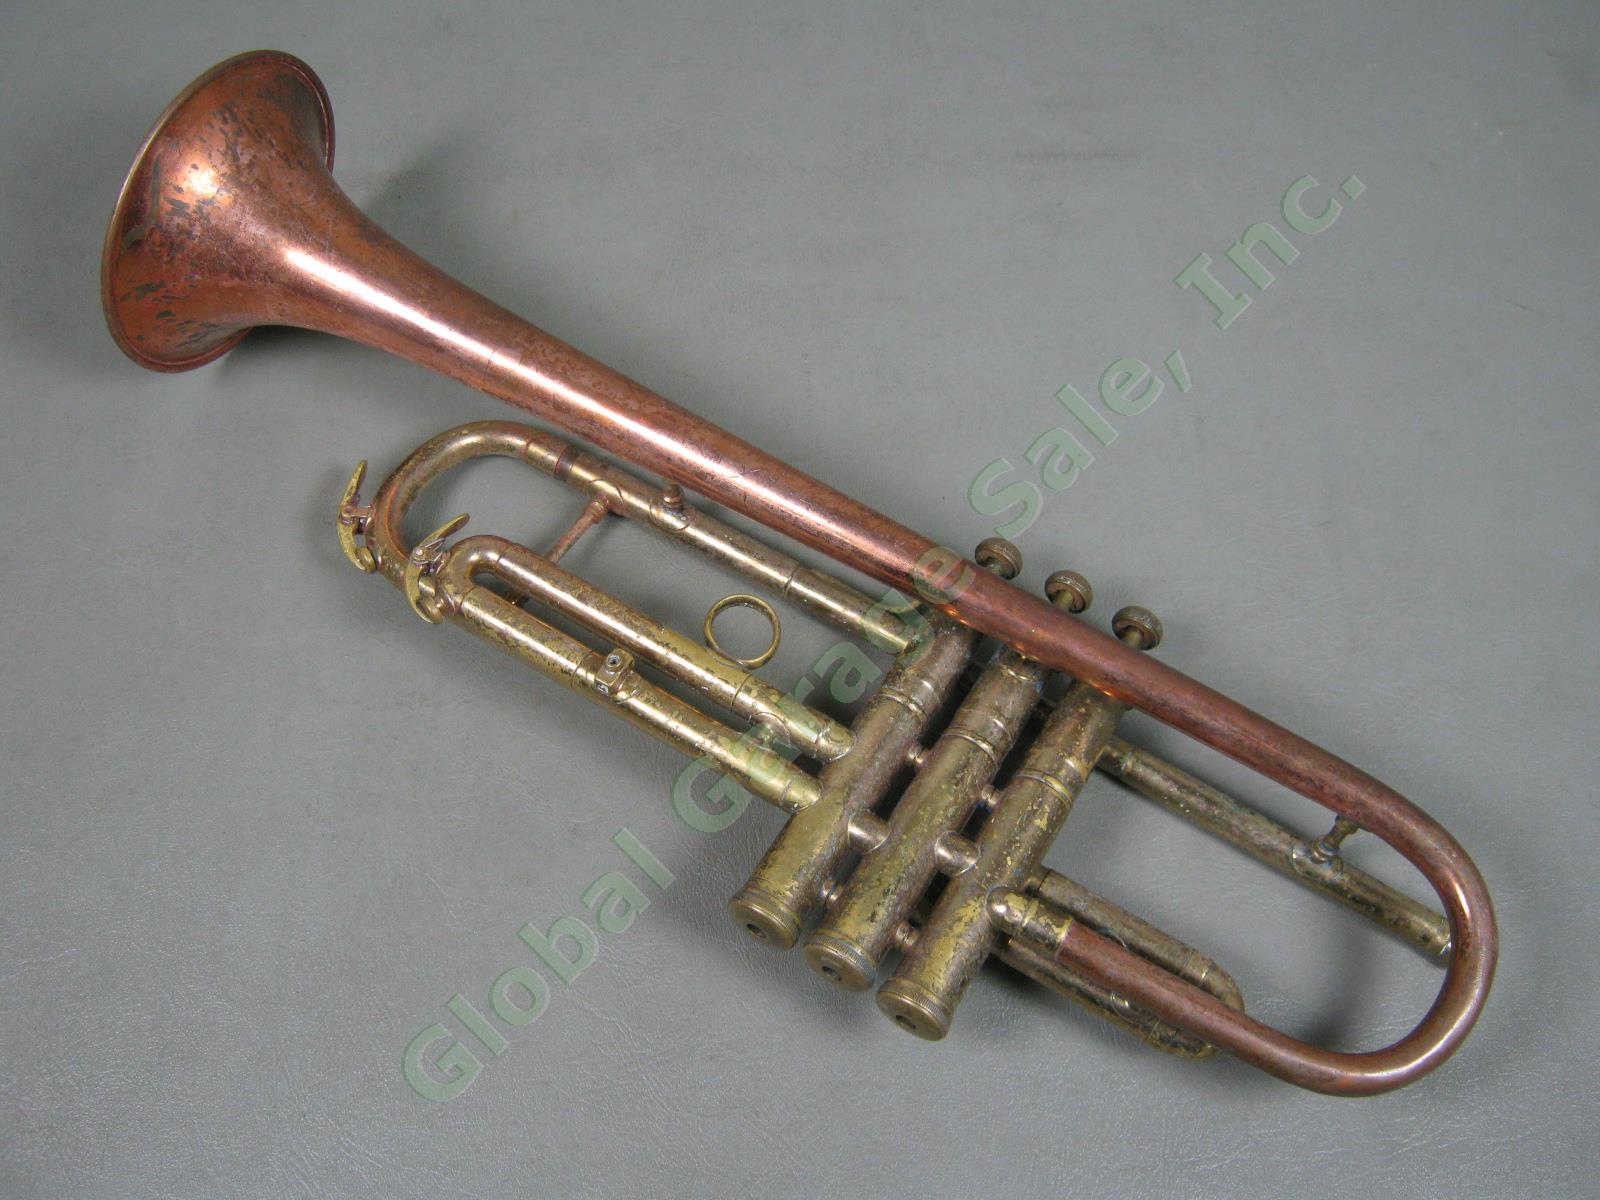 Vintage 1950s 1952 CG C G Conn Copper Bell Trumpet Serial Number 408748 No Res! 4